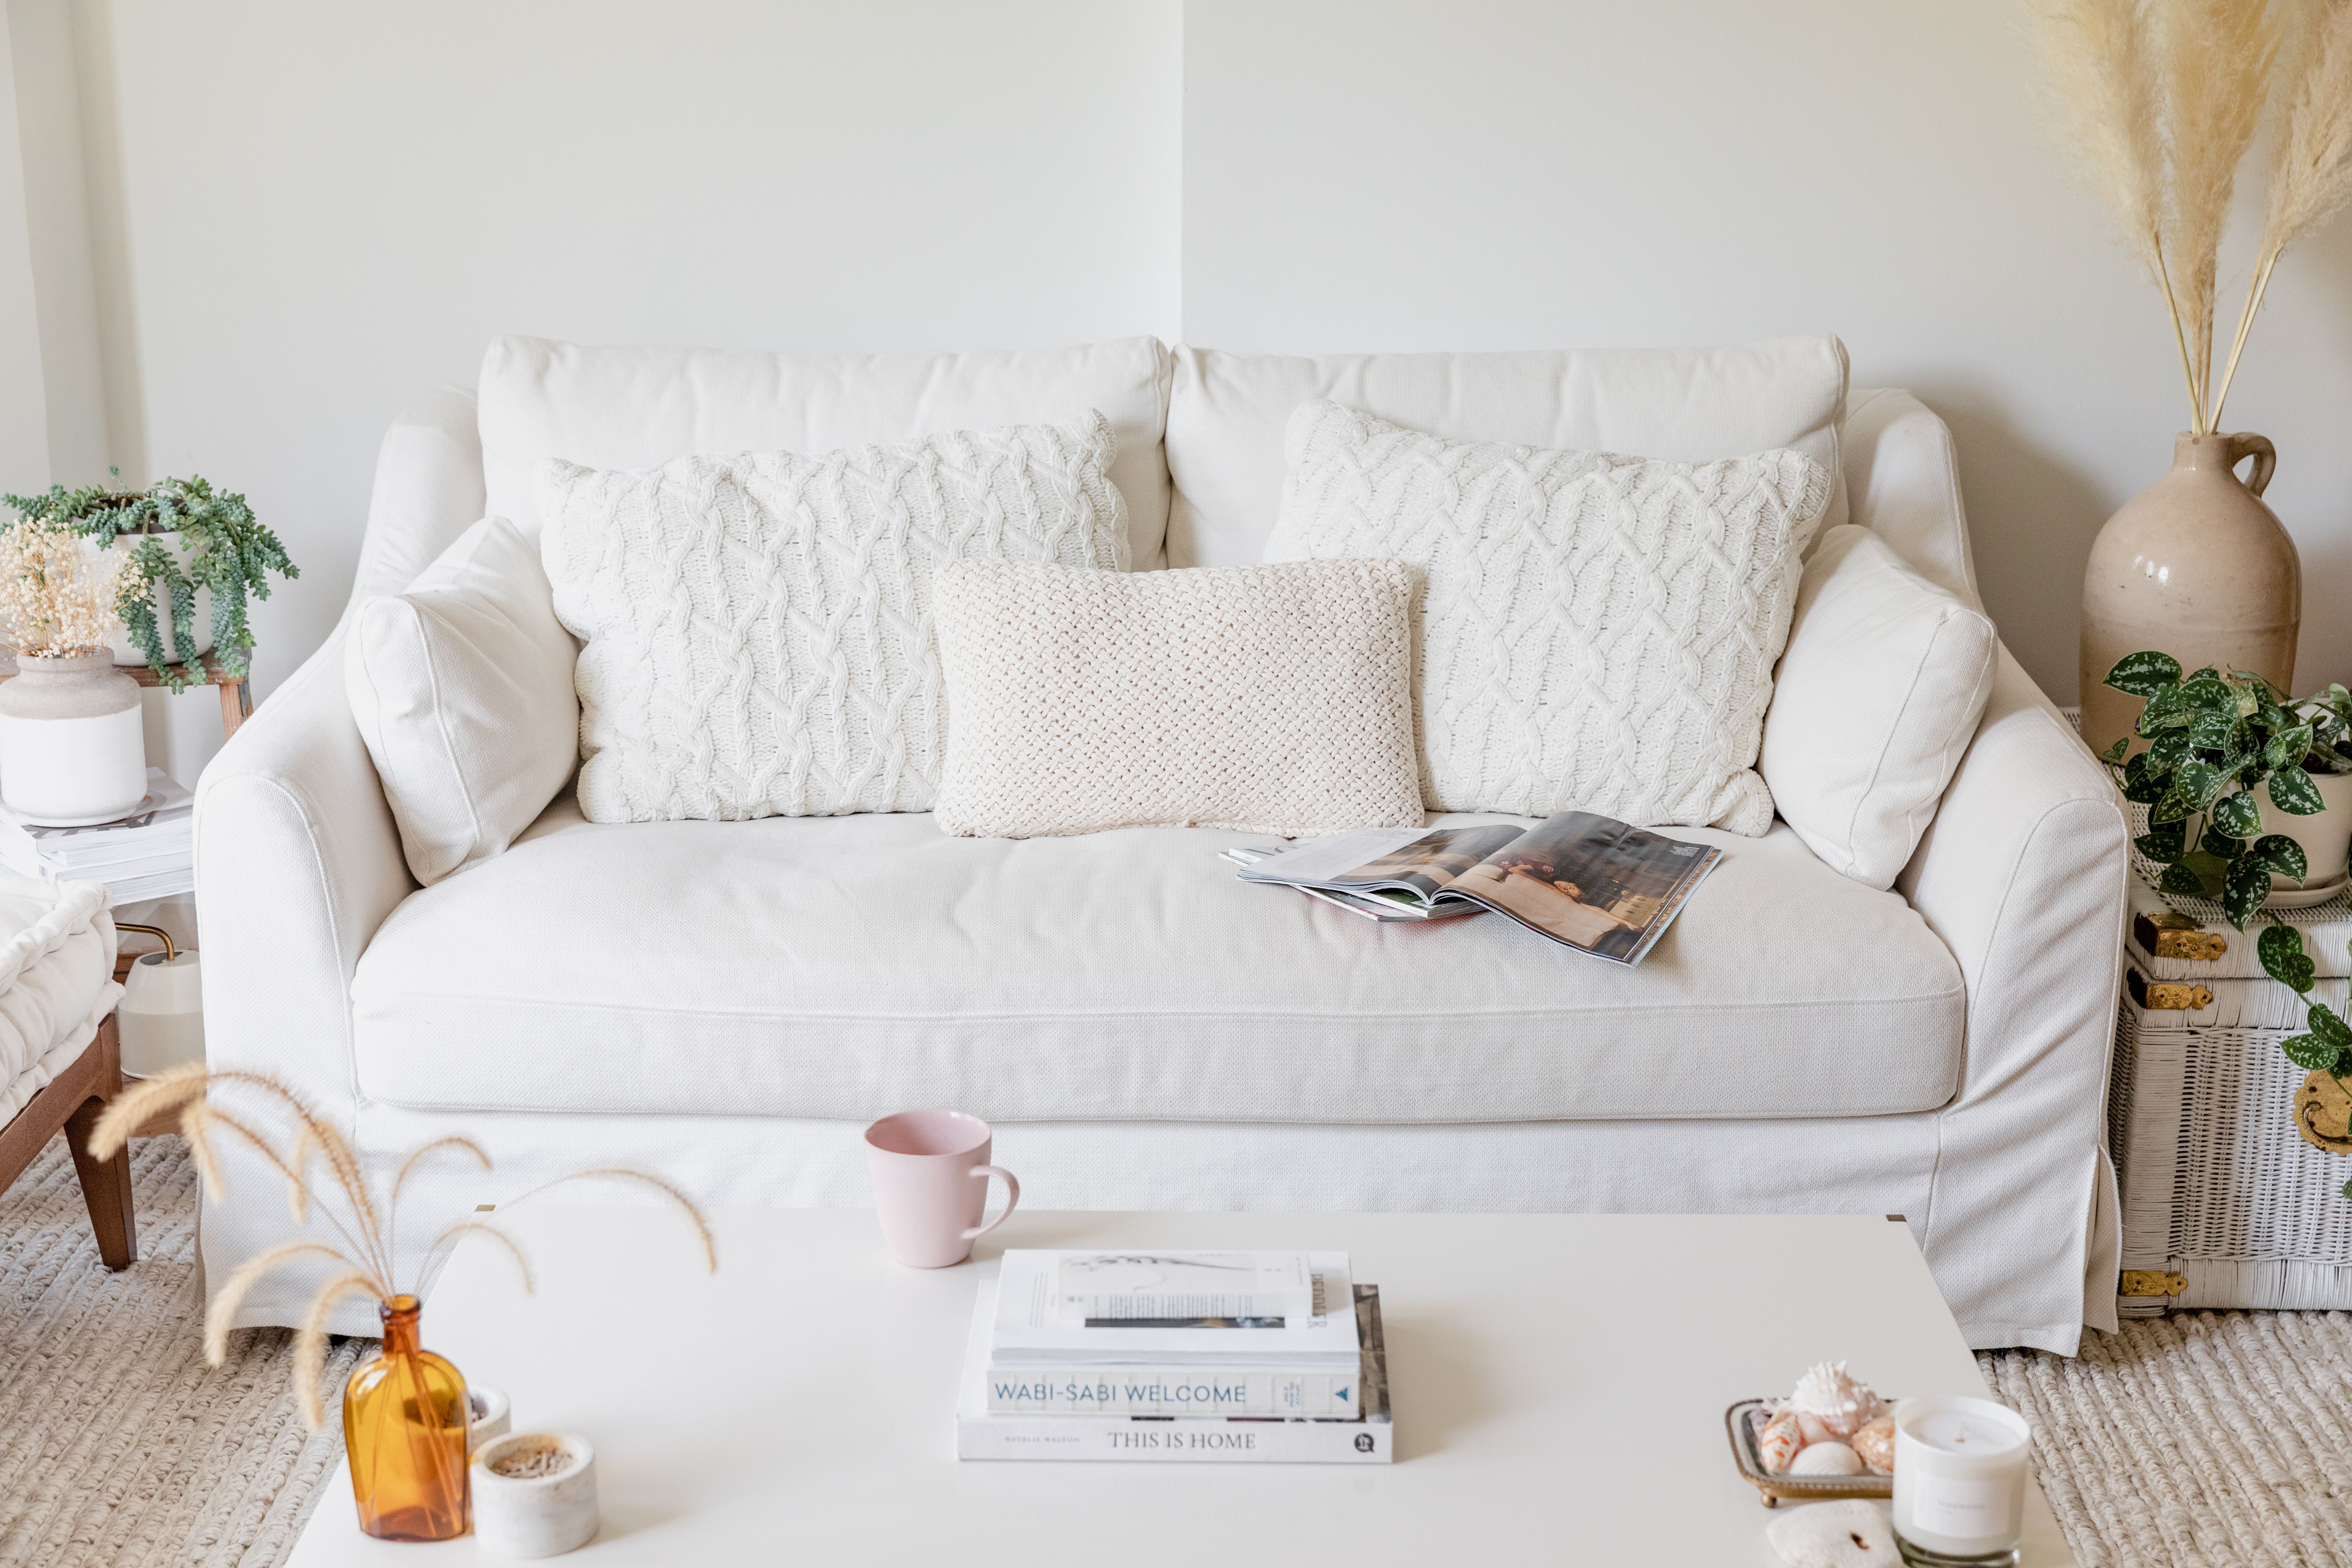 6 Things You Should Never Do to Your Sofa